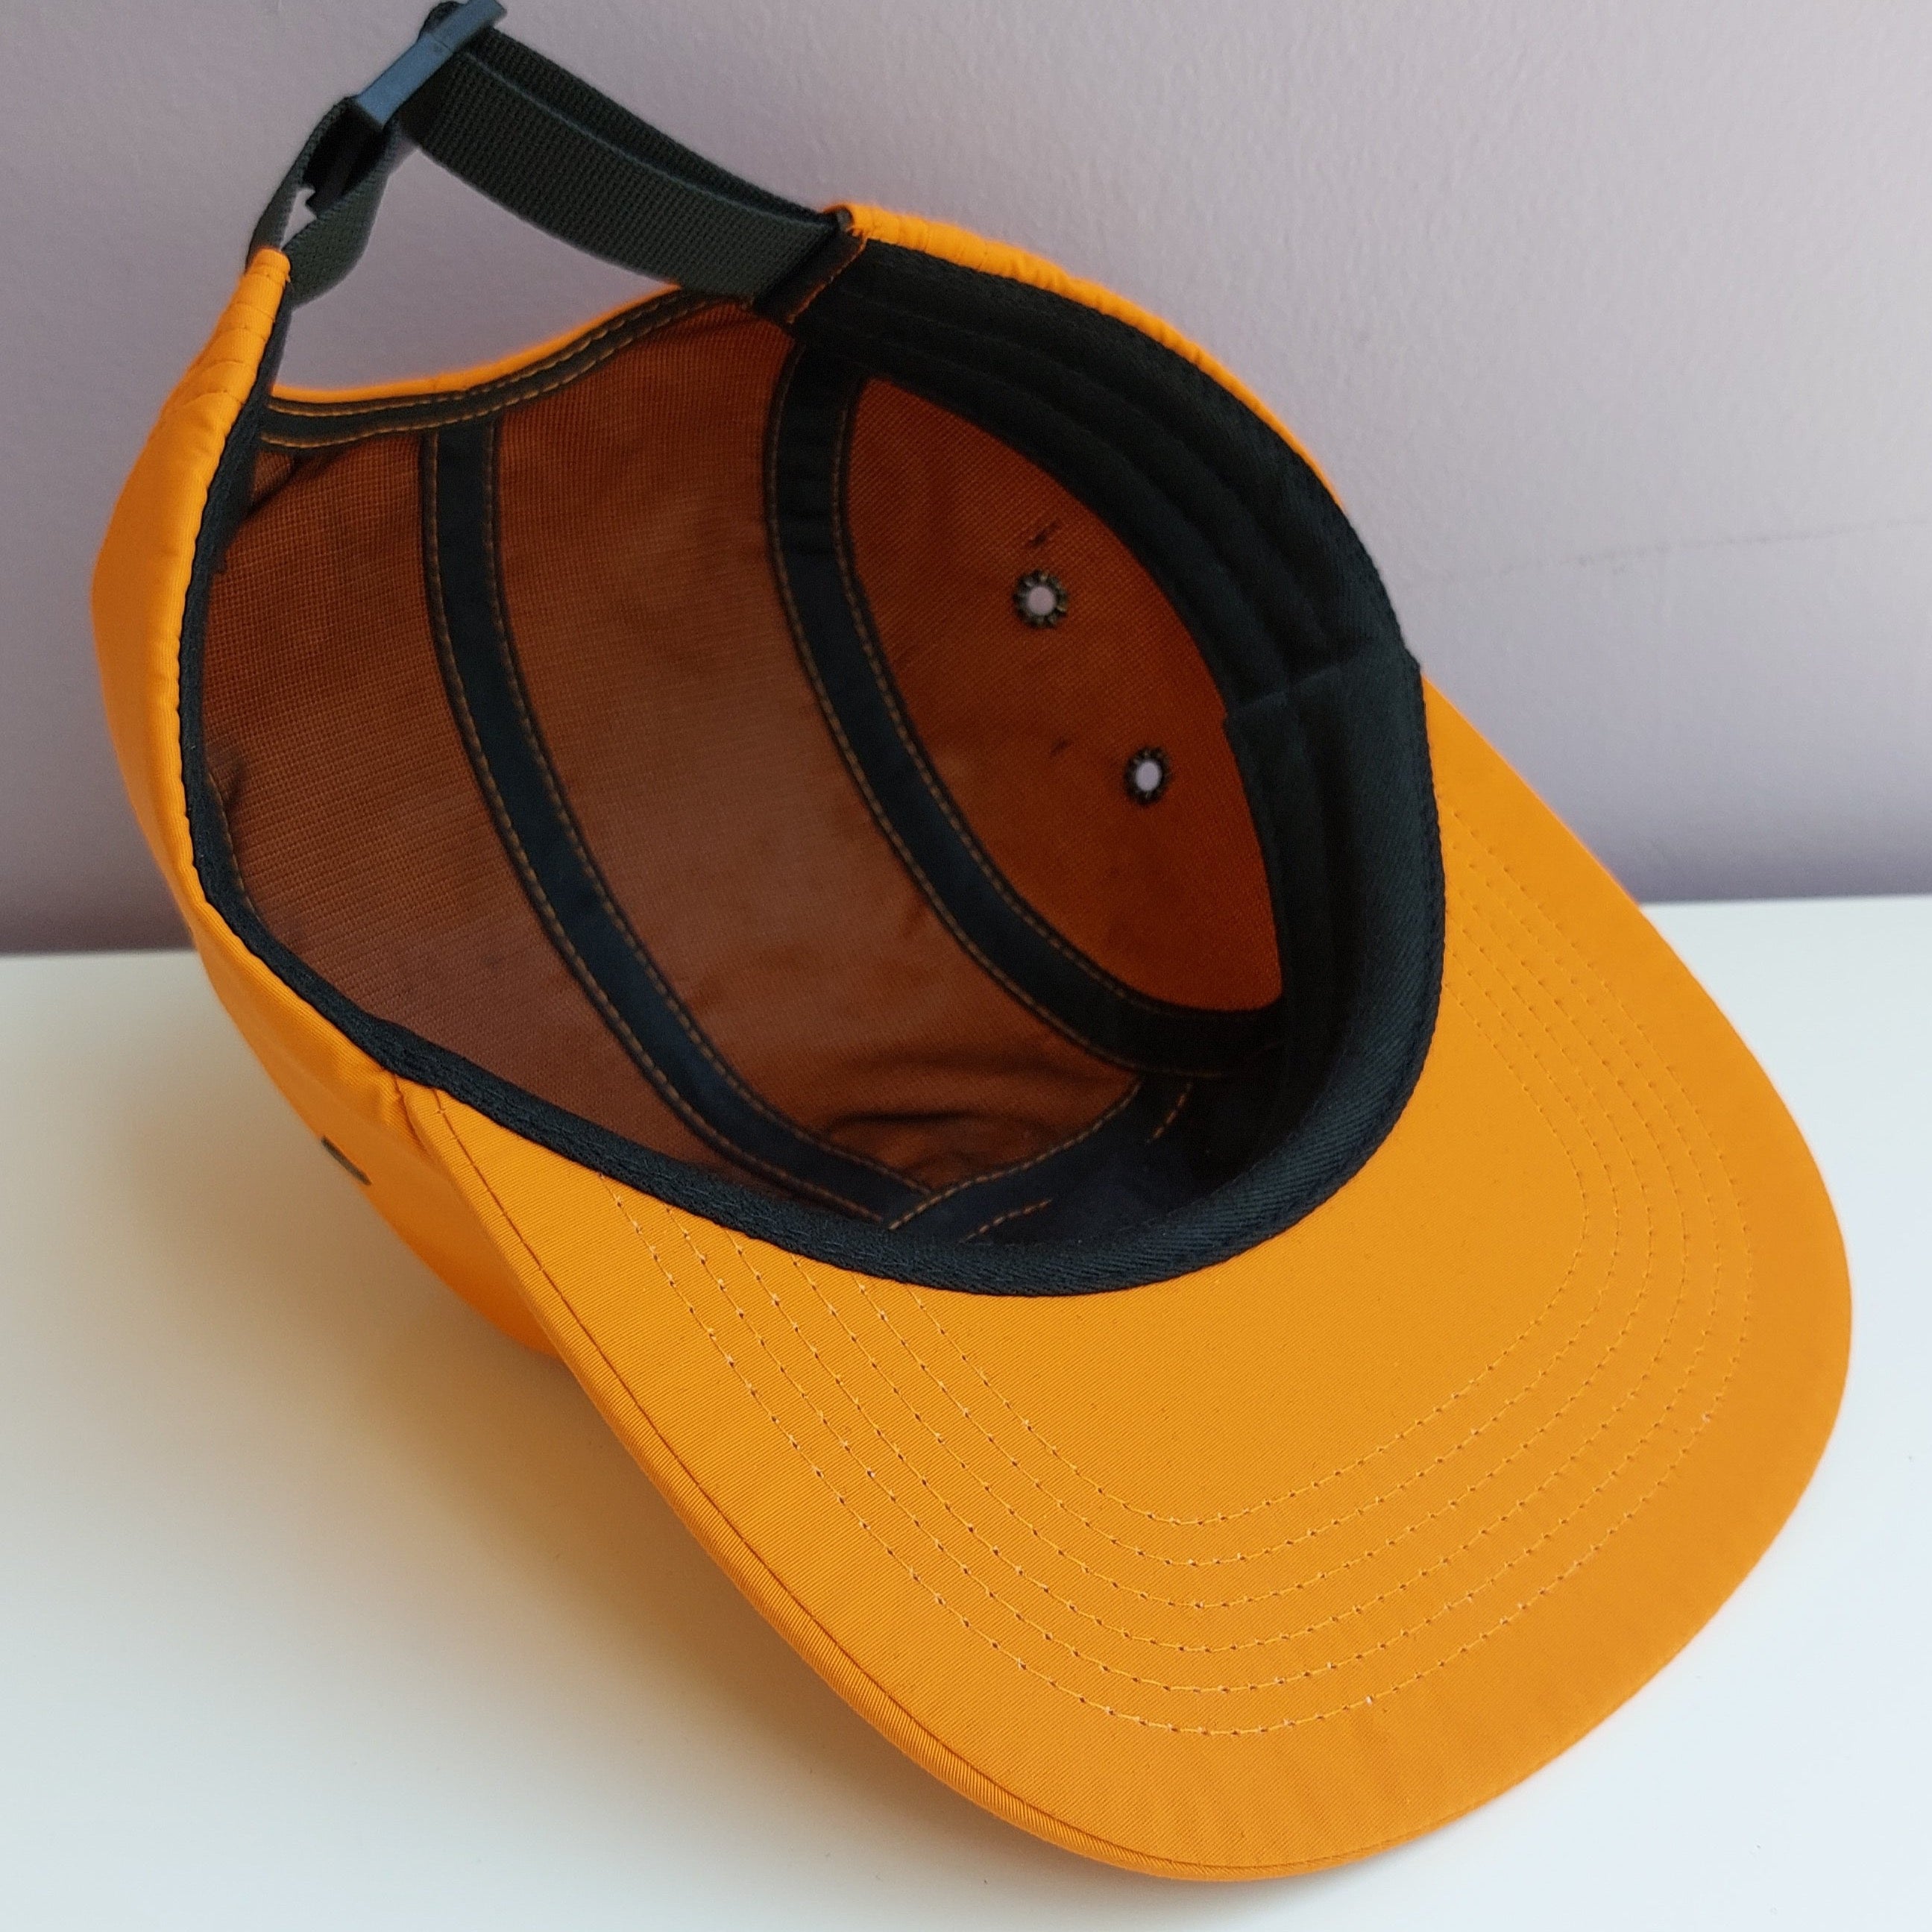 An orange 5 panel cap with black mesh interior is upside down & turned at a 45 degree angle sitting on a white surface with a light purple background.